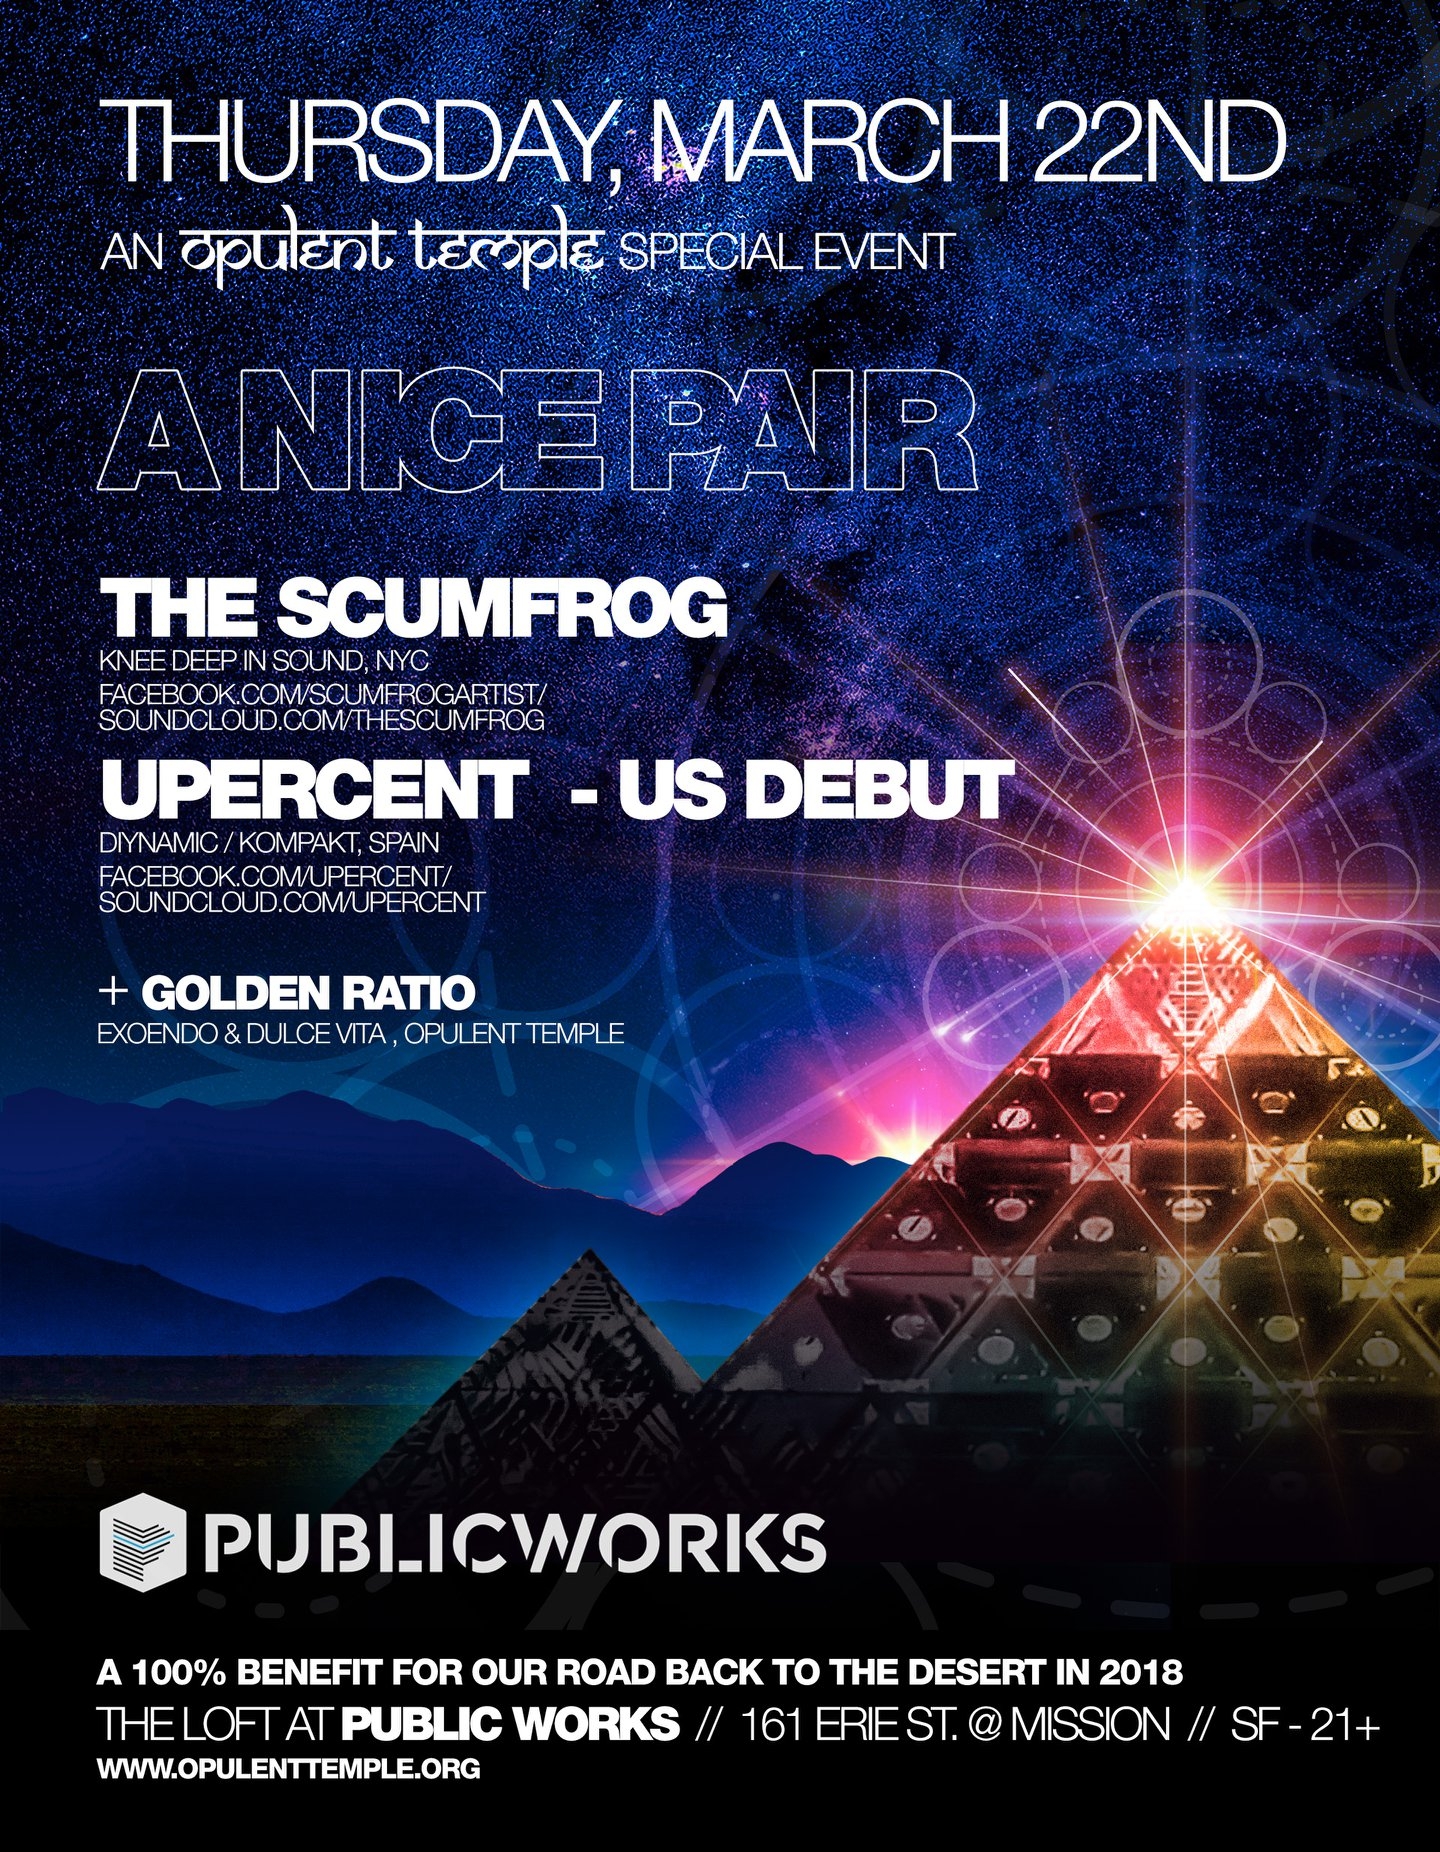 Opulent Temple special event: ‘A Nice Pair’: Scumfrog & Upercent